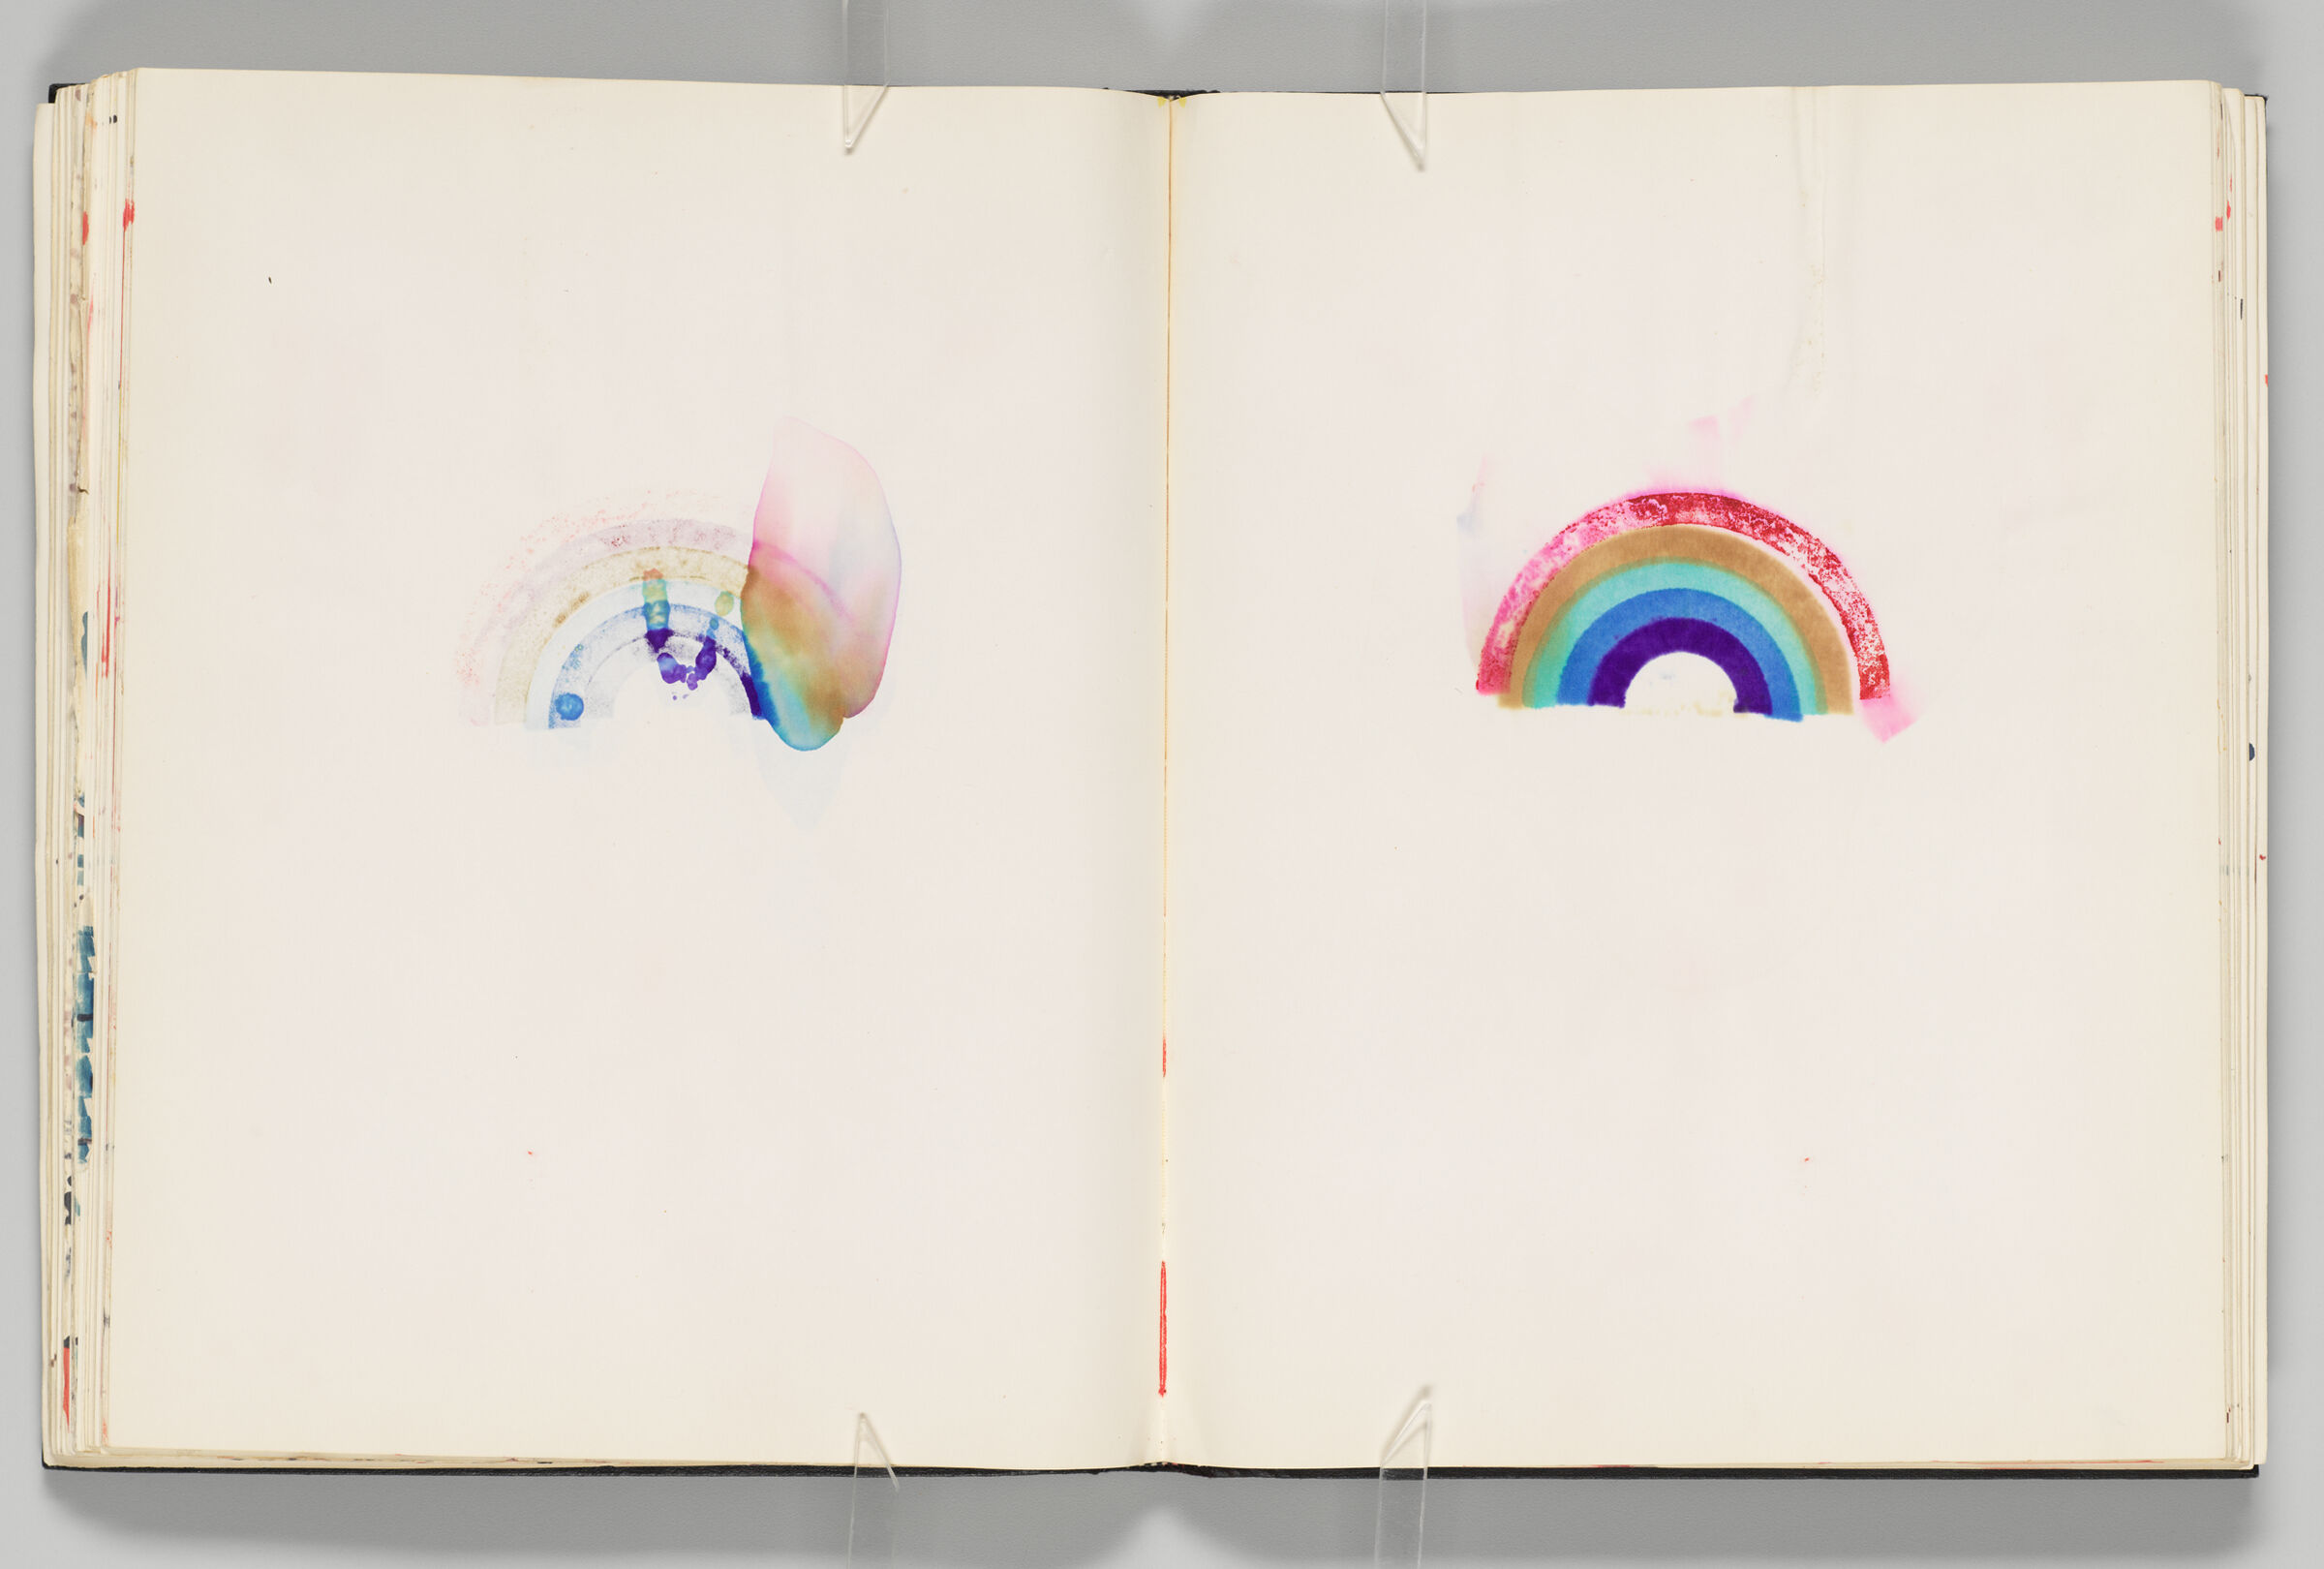 Untitled (Bleed-Through Of Previous Page And Color Transfer, Left Page); Untitled (Rainbow Stamp Impression Manipulated With Water, Right Page)